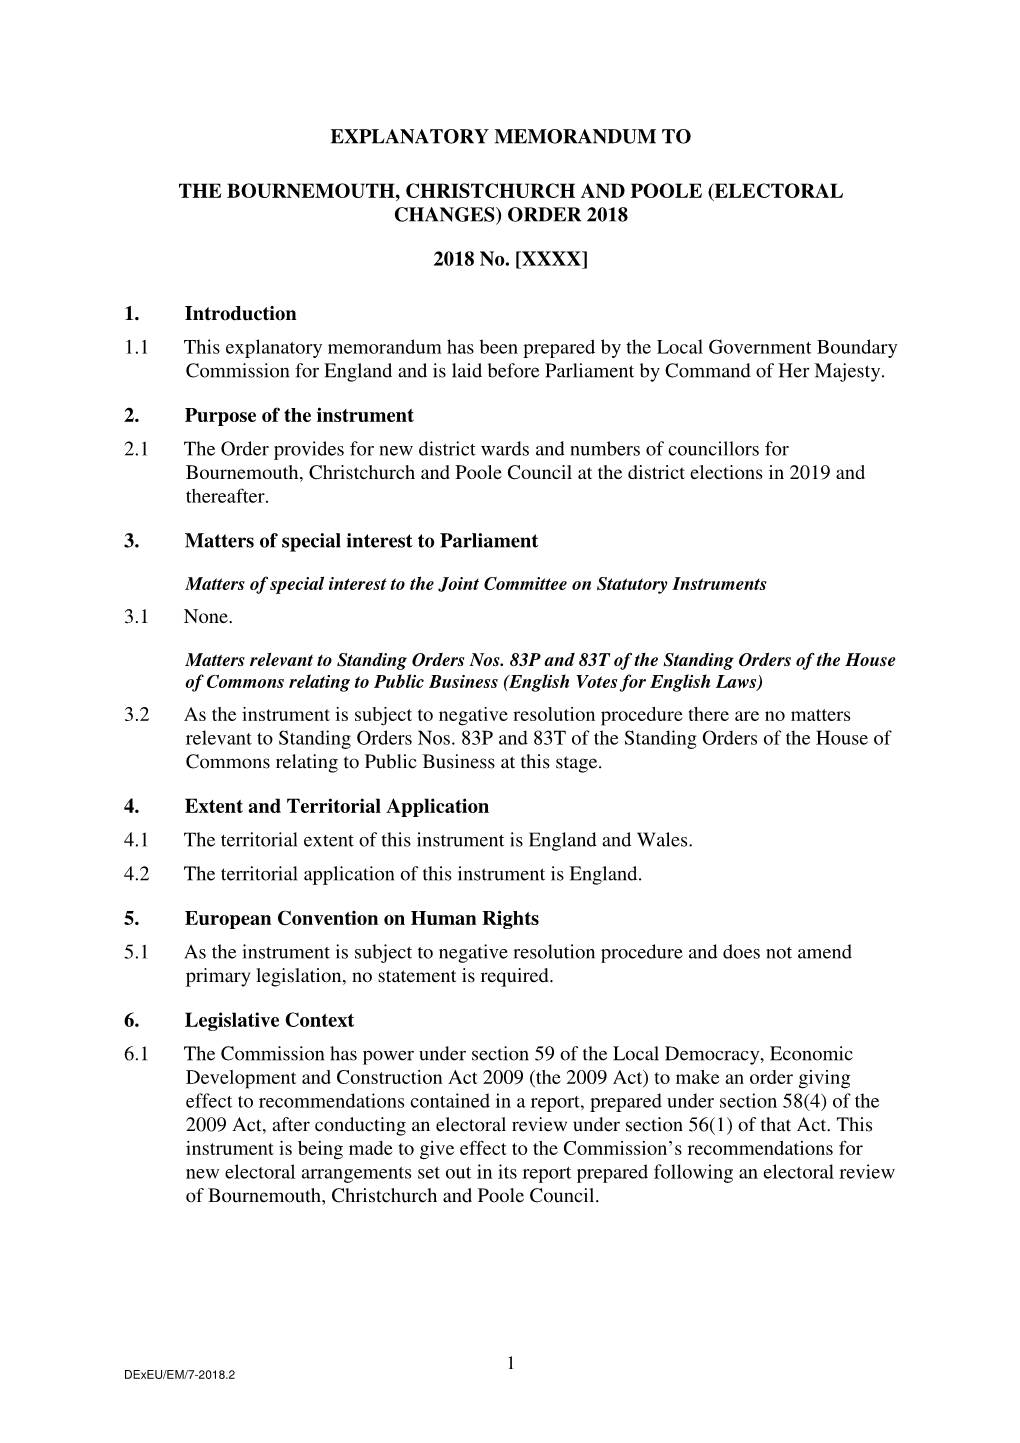 The Bournemouth, Christchurch and Poole (Electoral Changes) Order 2018